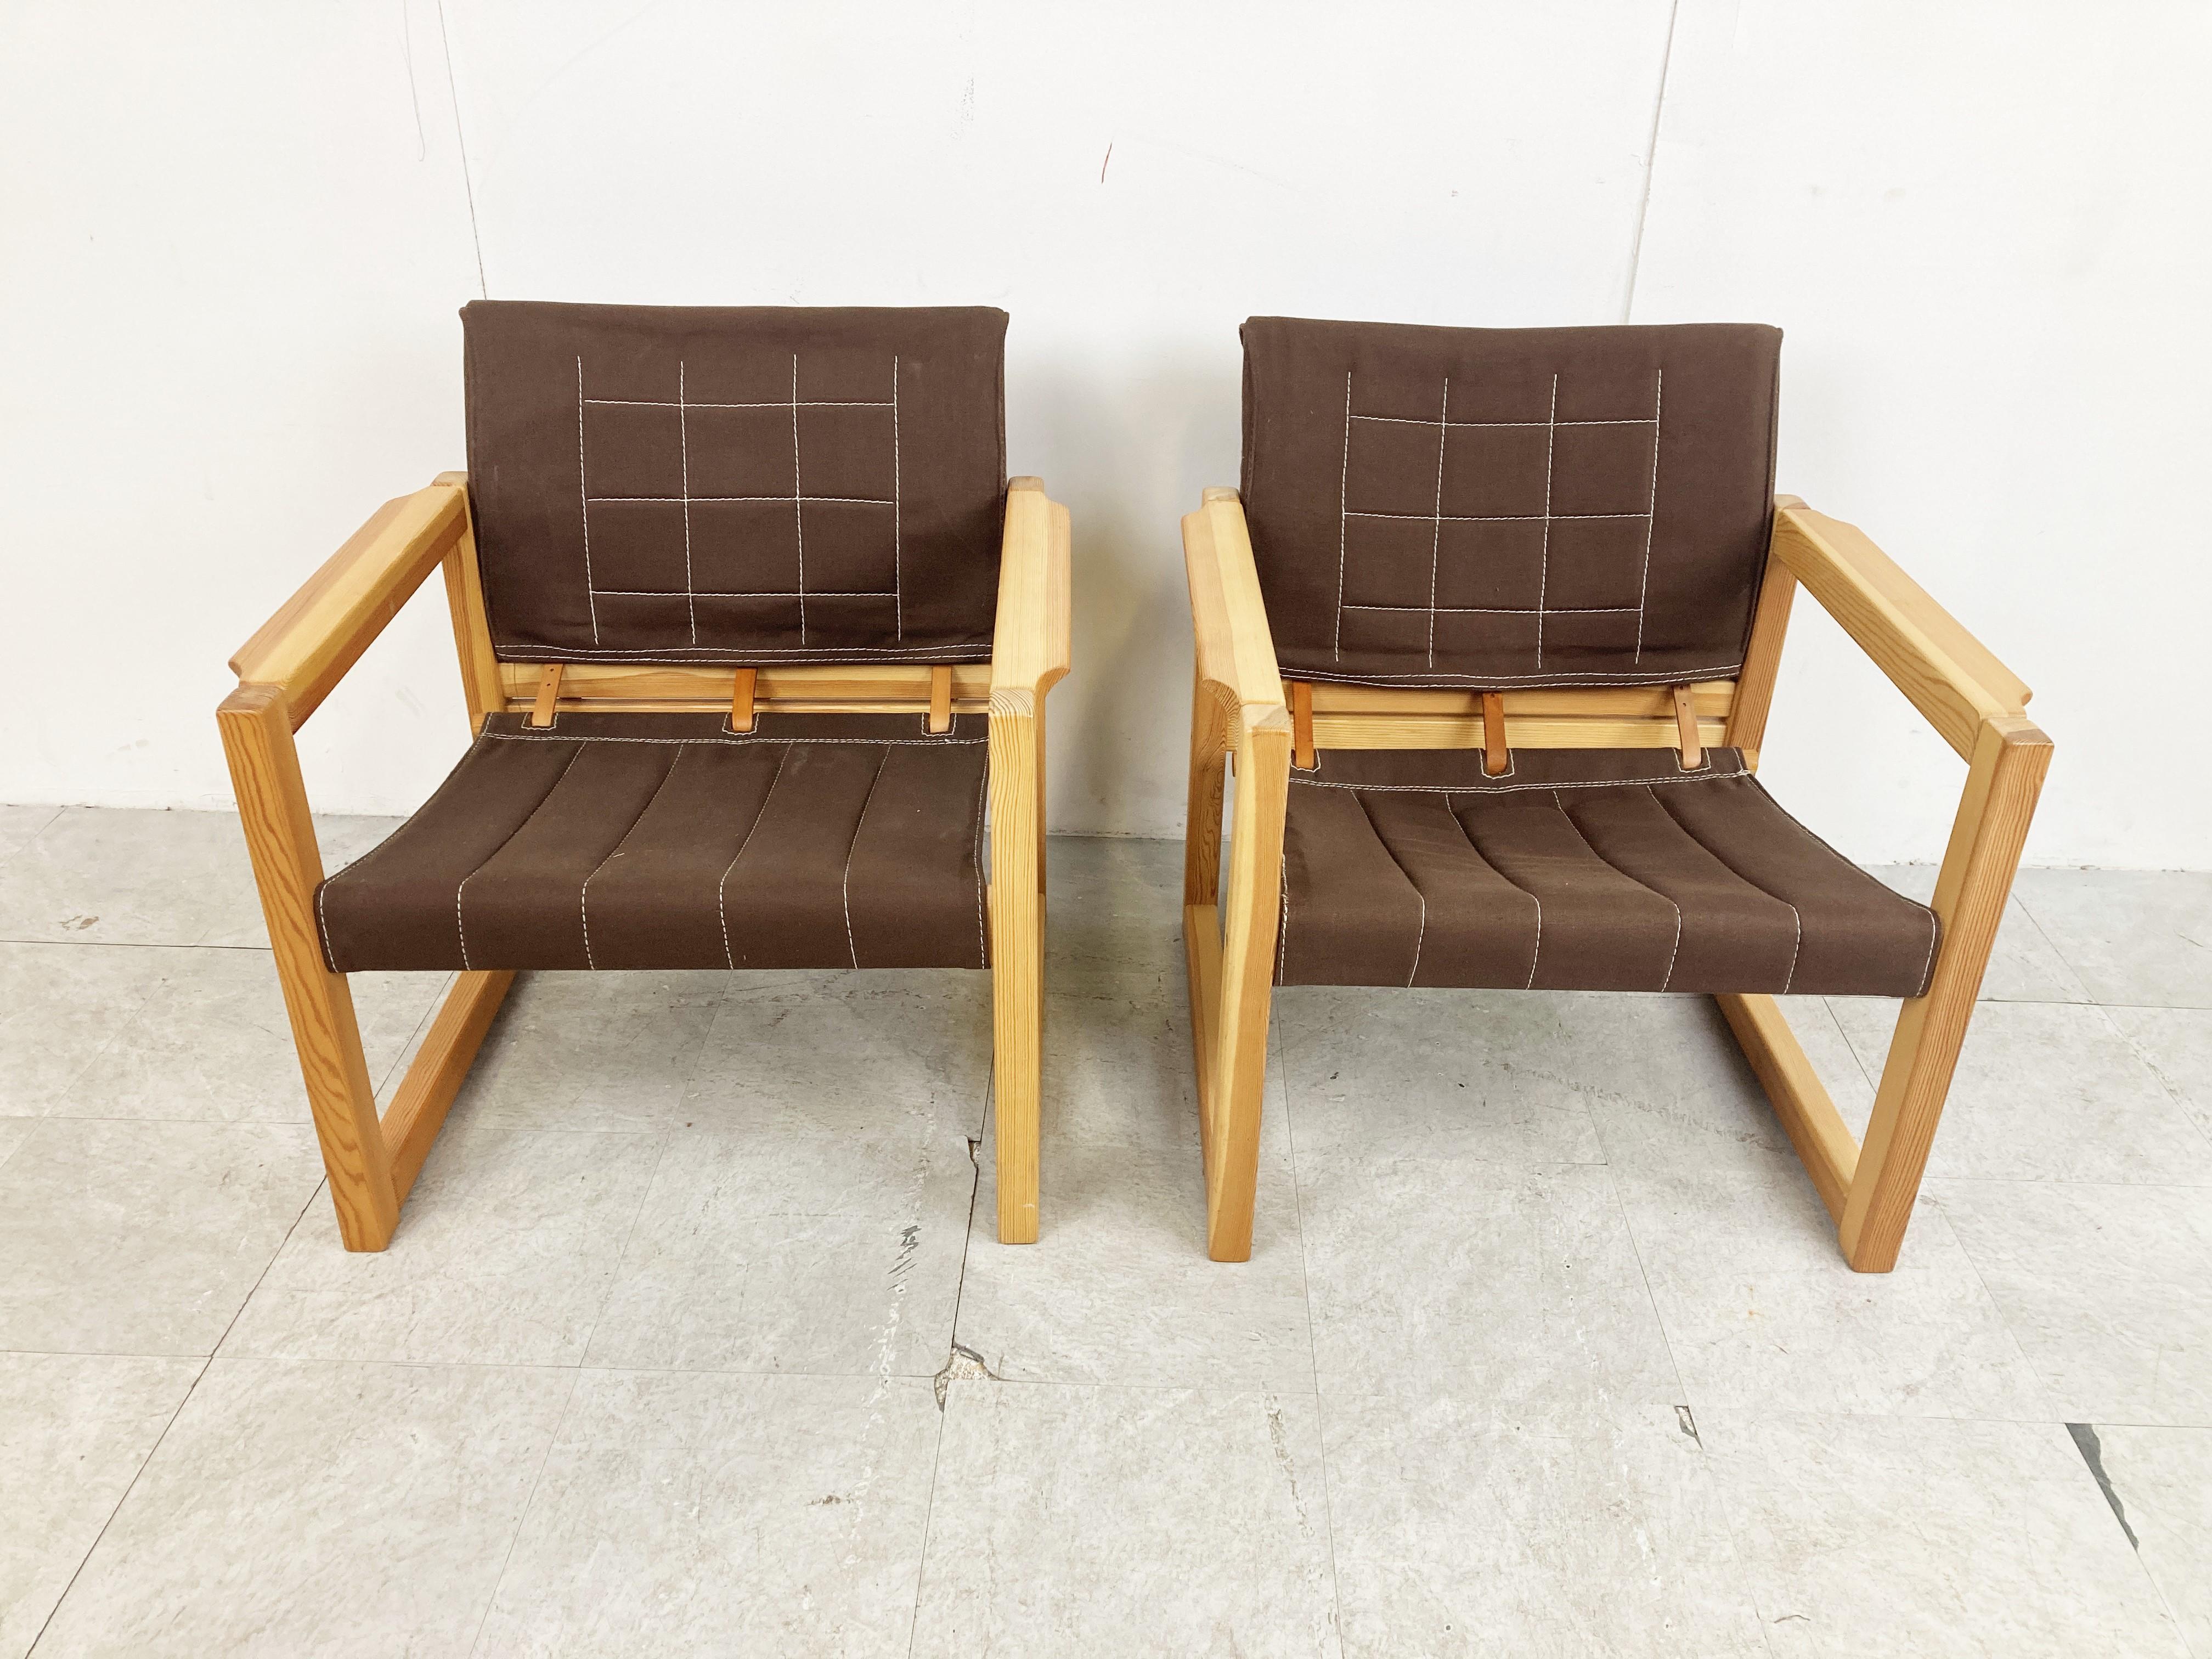 Scandinavian Modern Pair of Diana Armchairs Designed by Karin Mobring for Ikea, 1980s For Sale